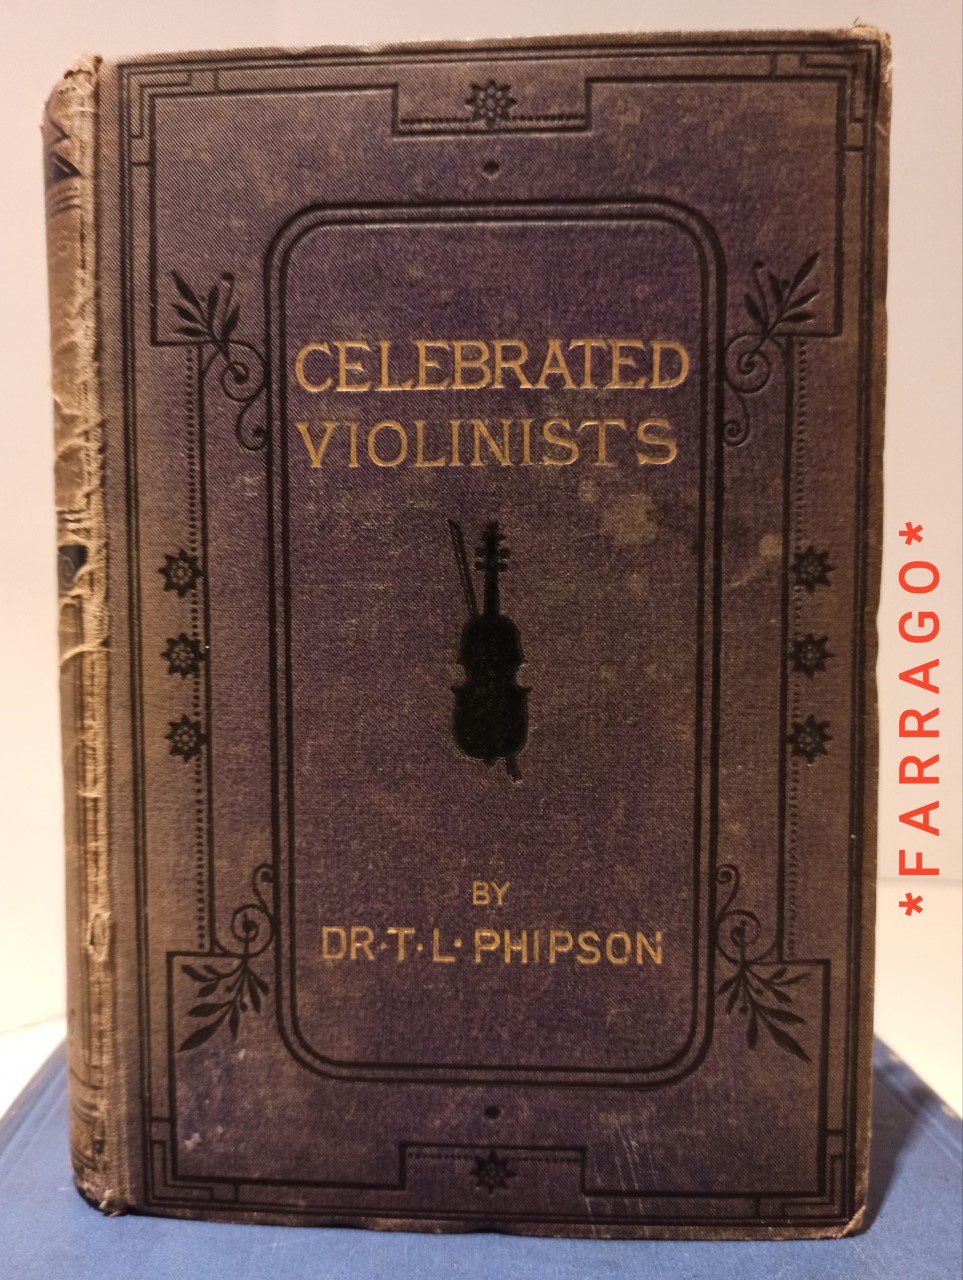 Biographical Sketches and Anecdotes of CELEBRATED VIOLINISTS - PHIPSON, Dr. T. L.